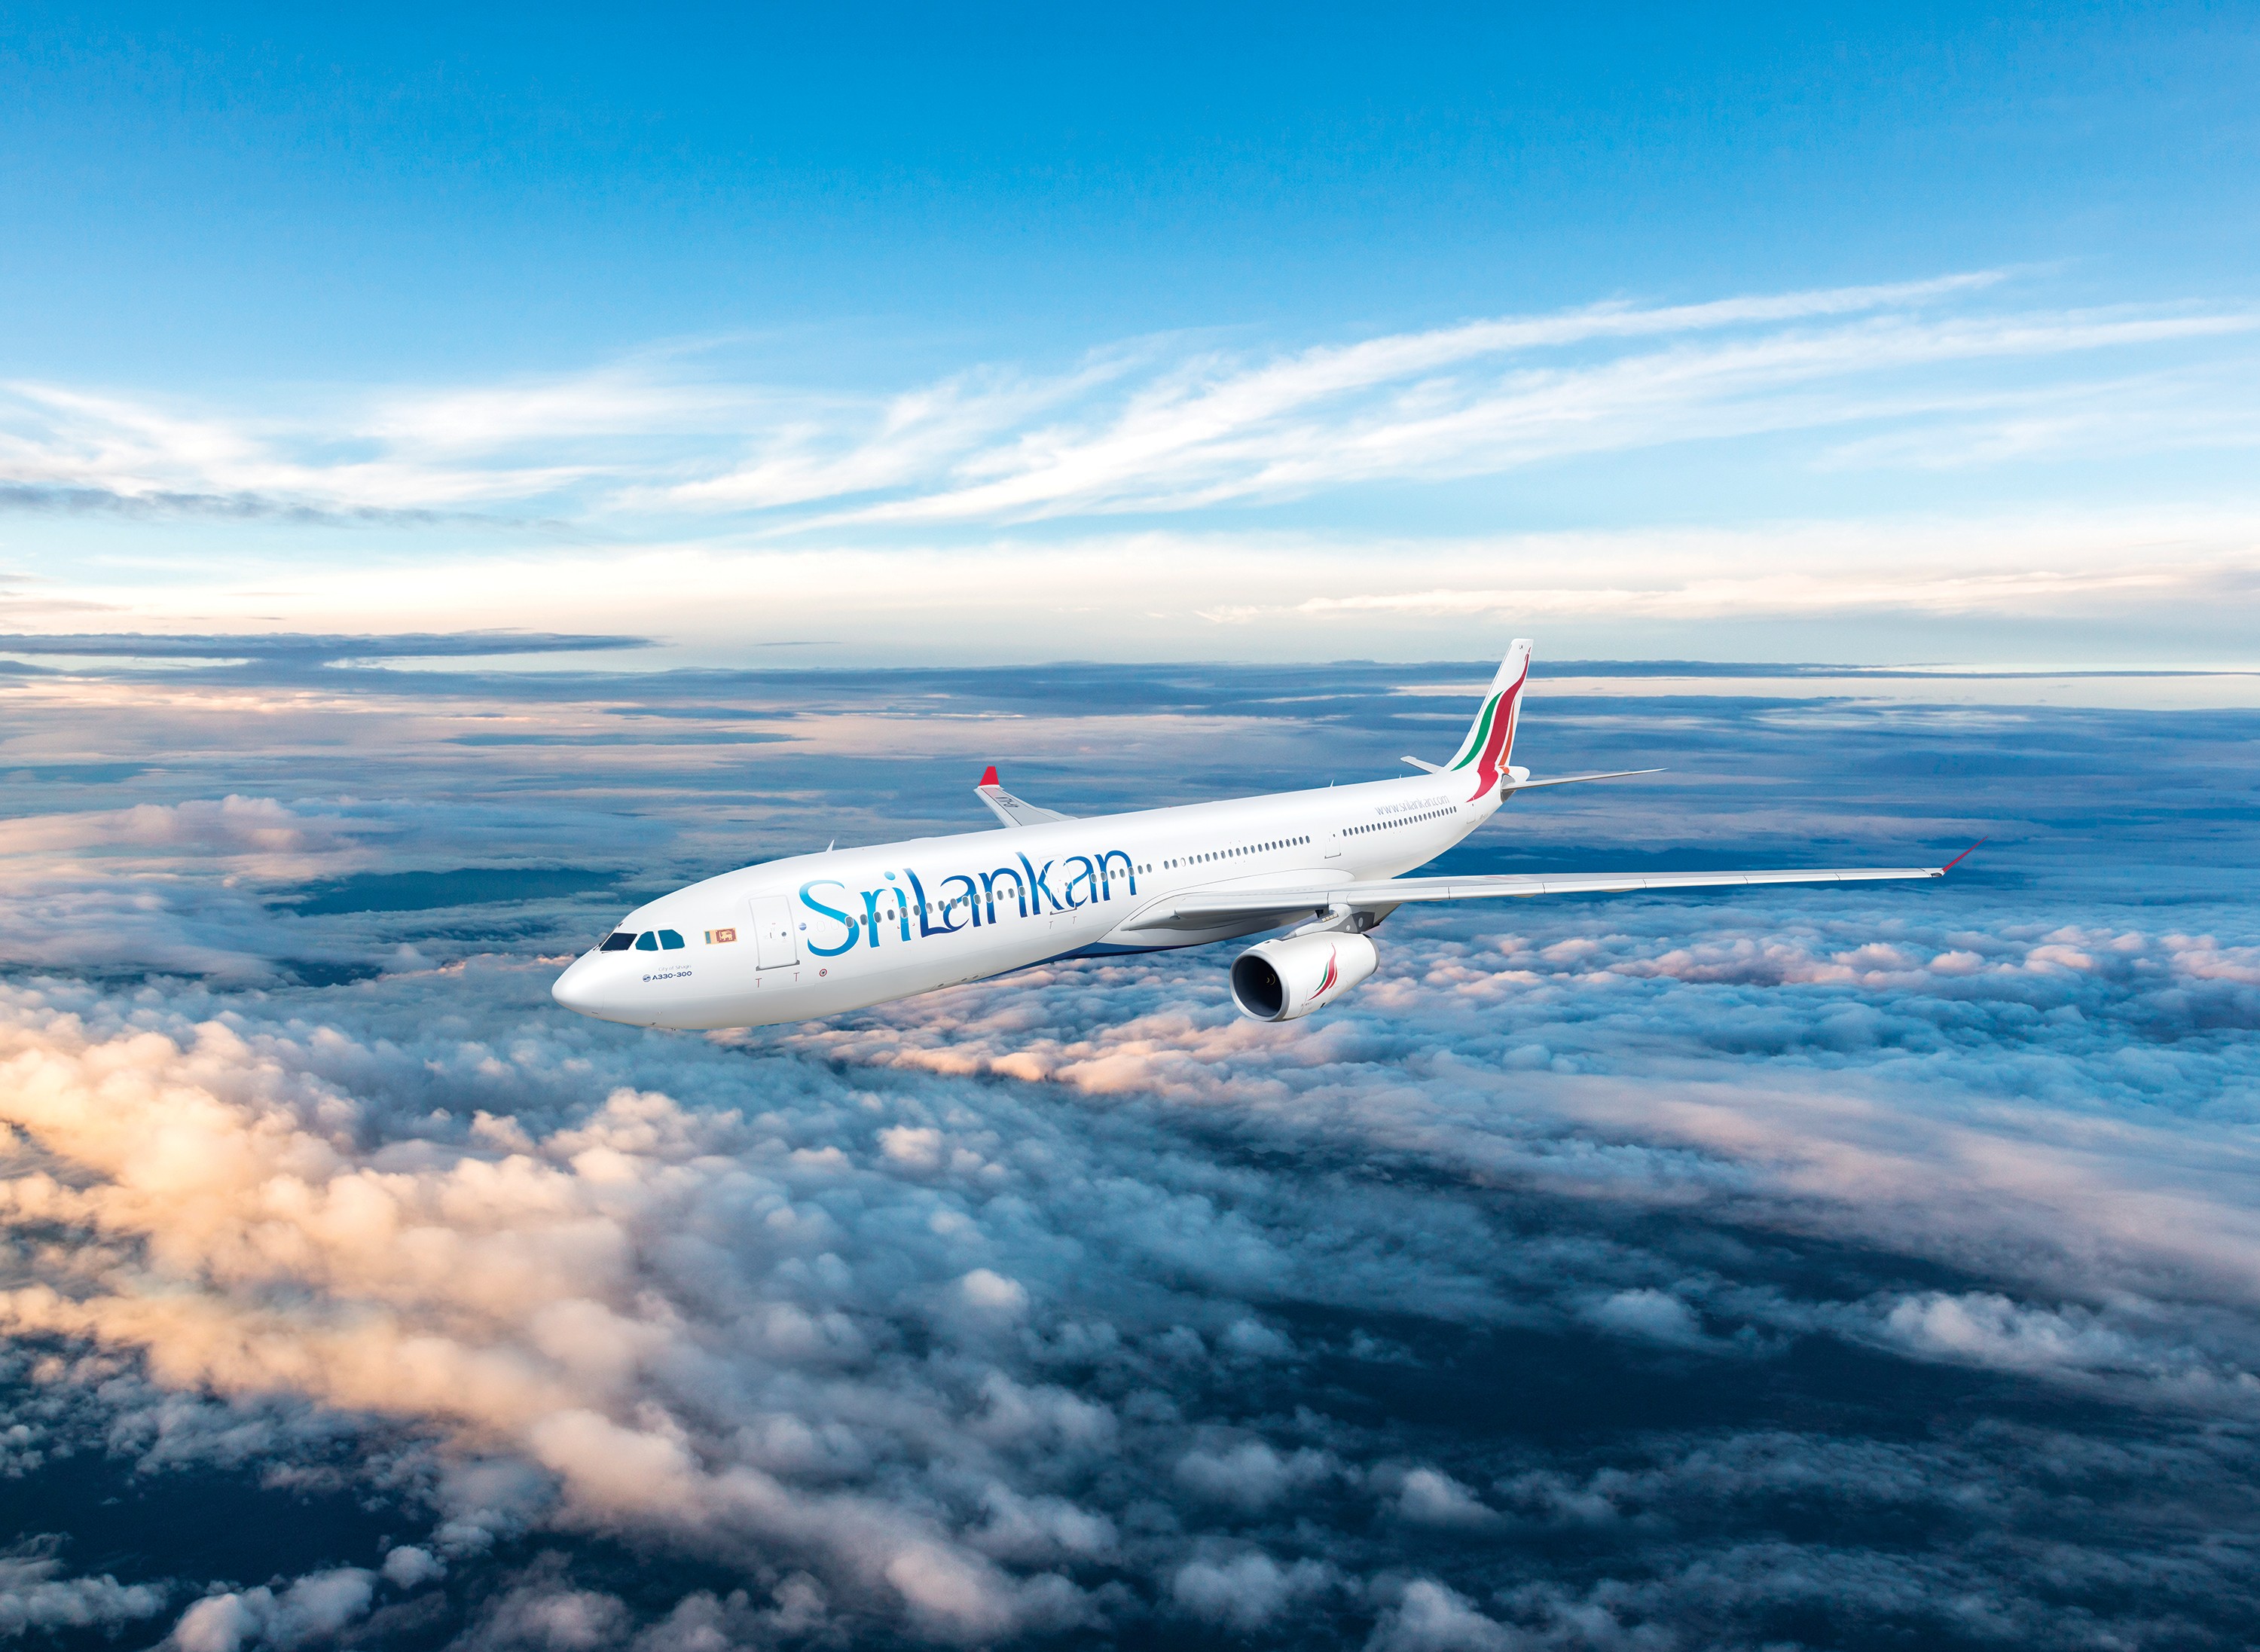 SriLankan Airlines takes action with regard to Coronavirus outbreak